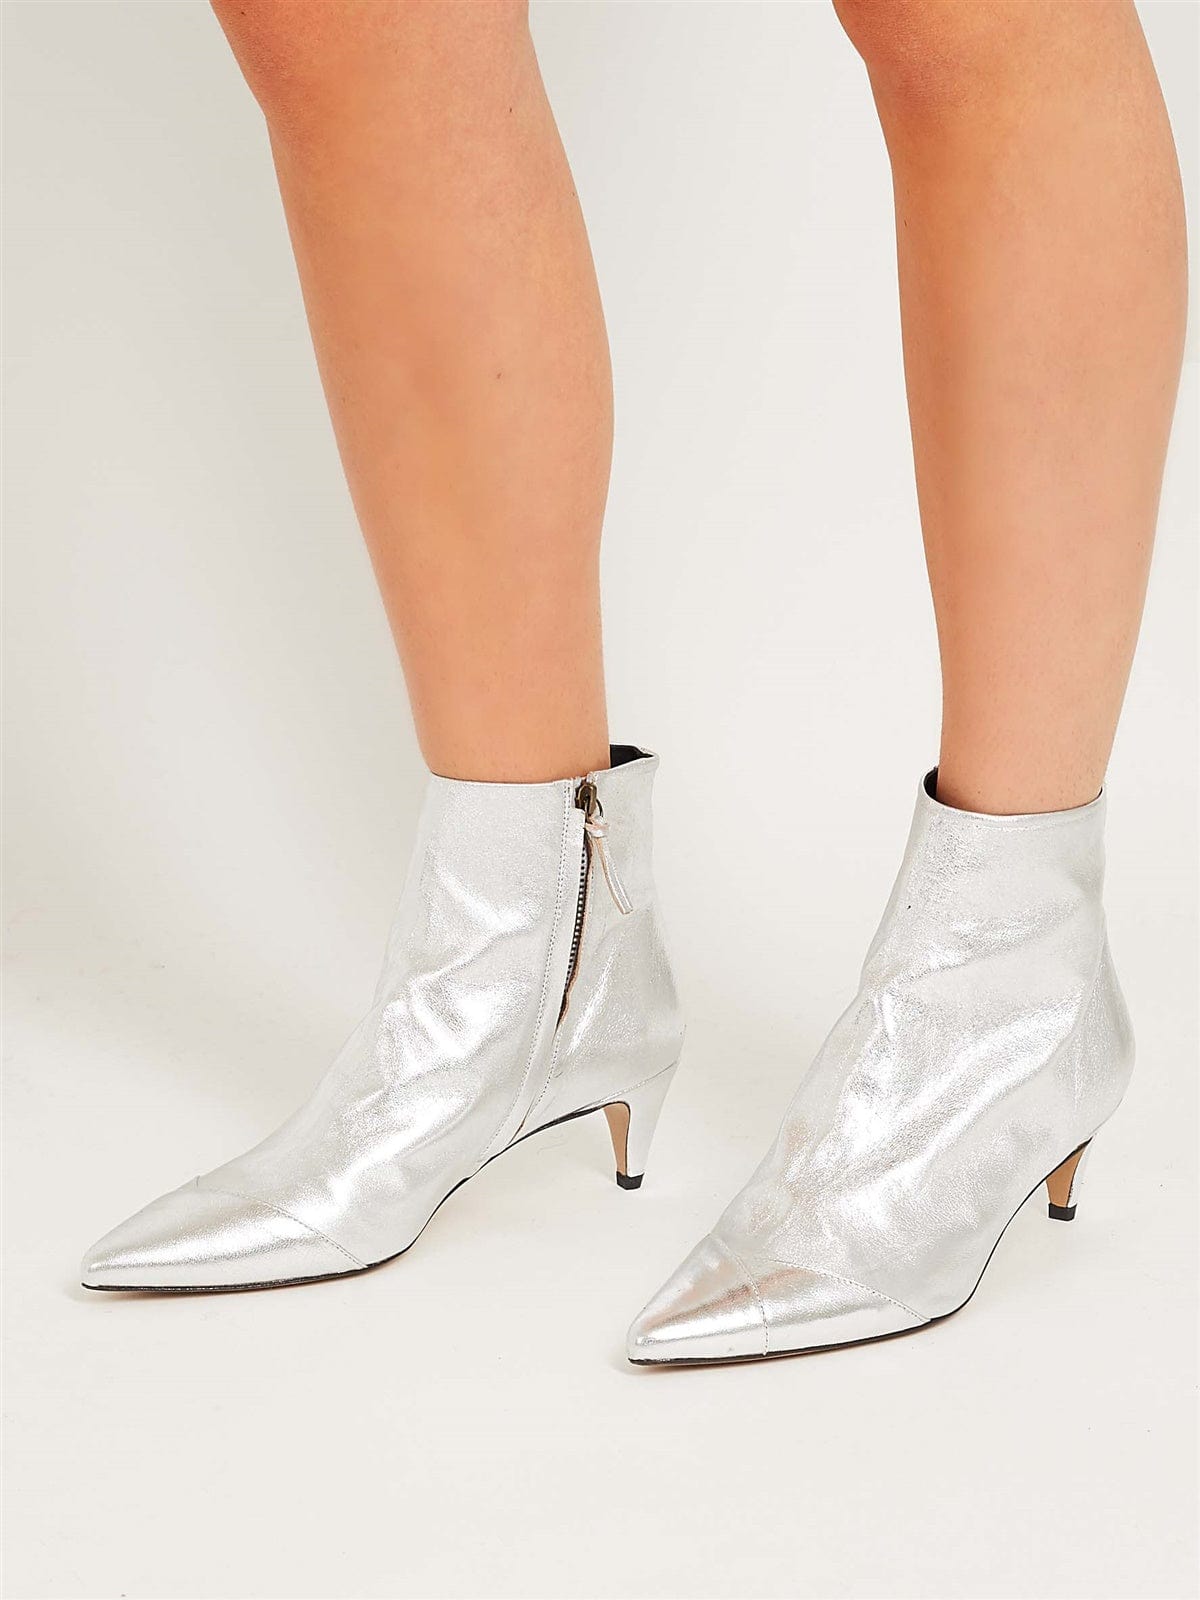 isabel marant silver boots